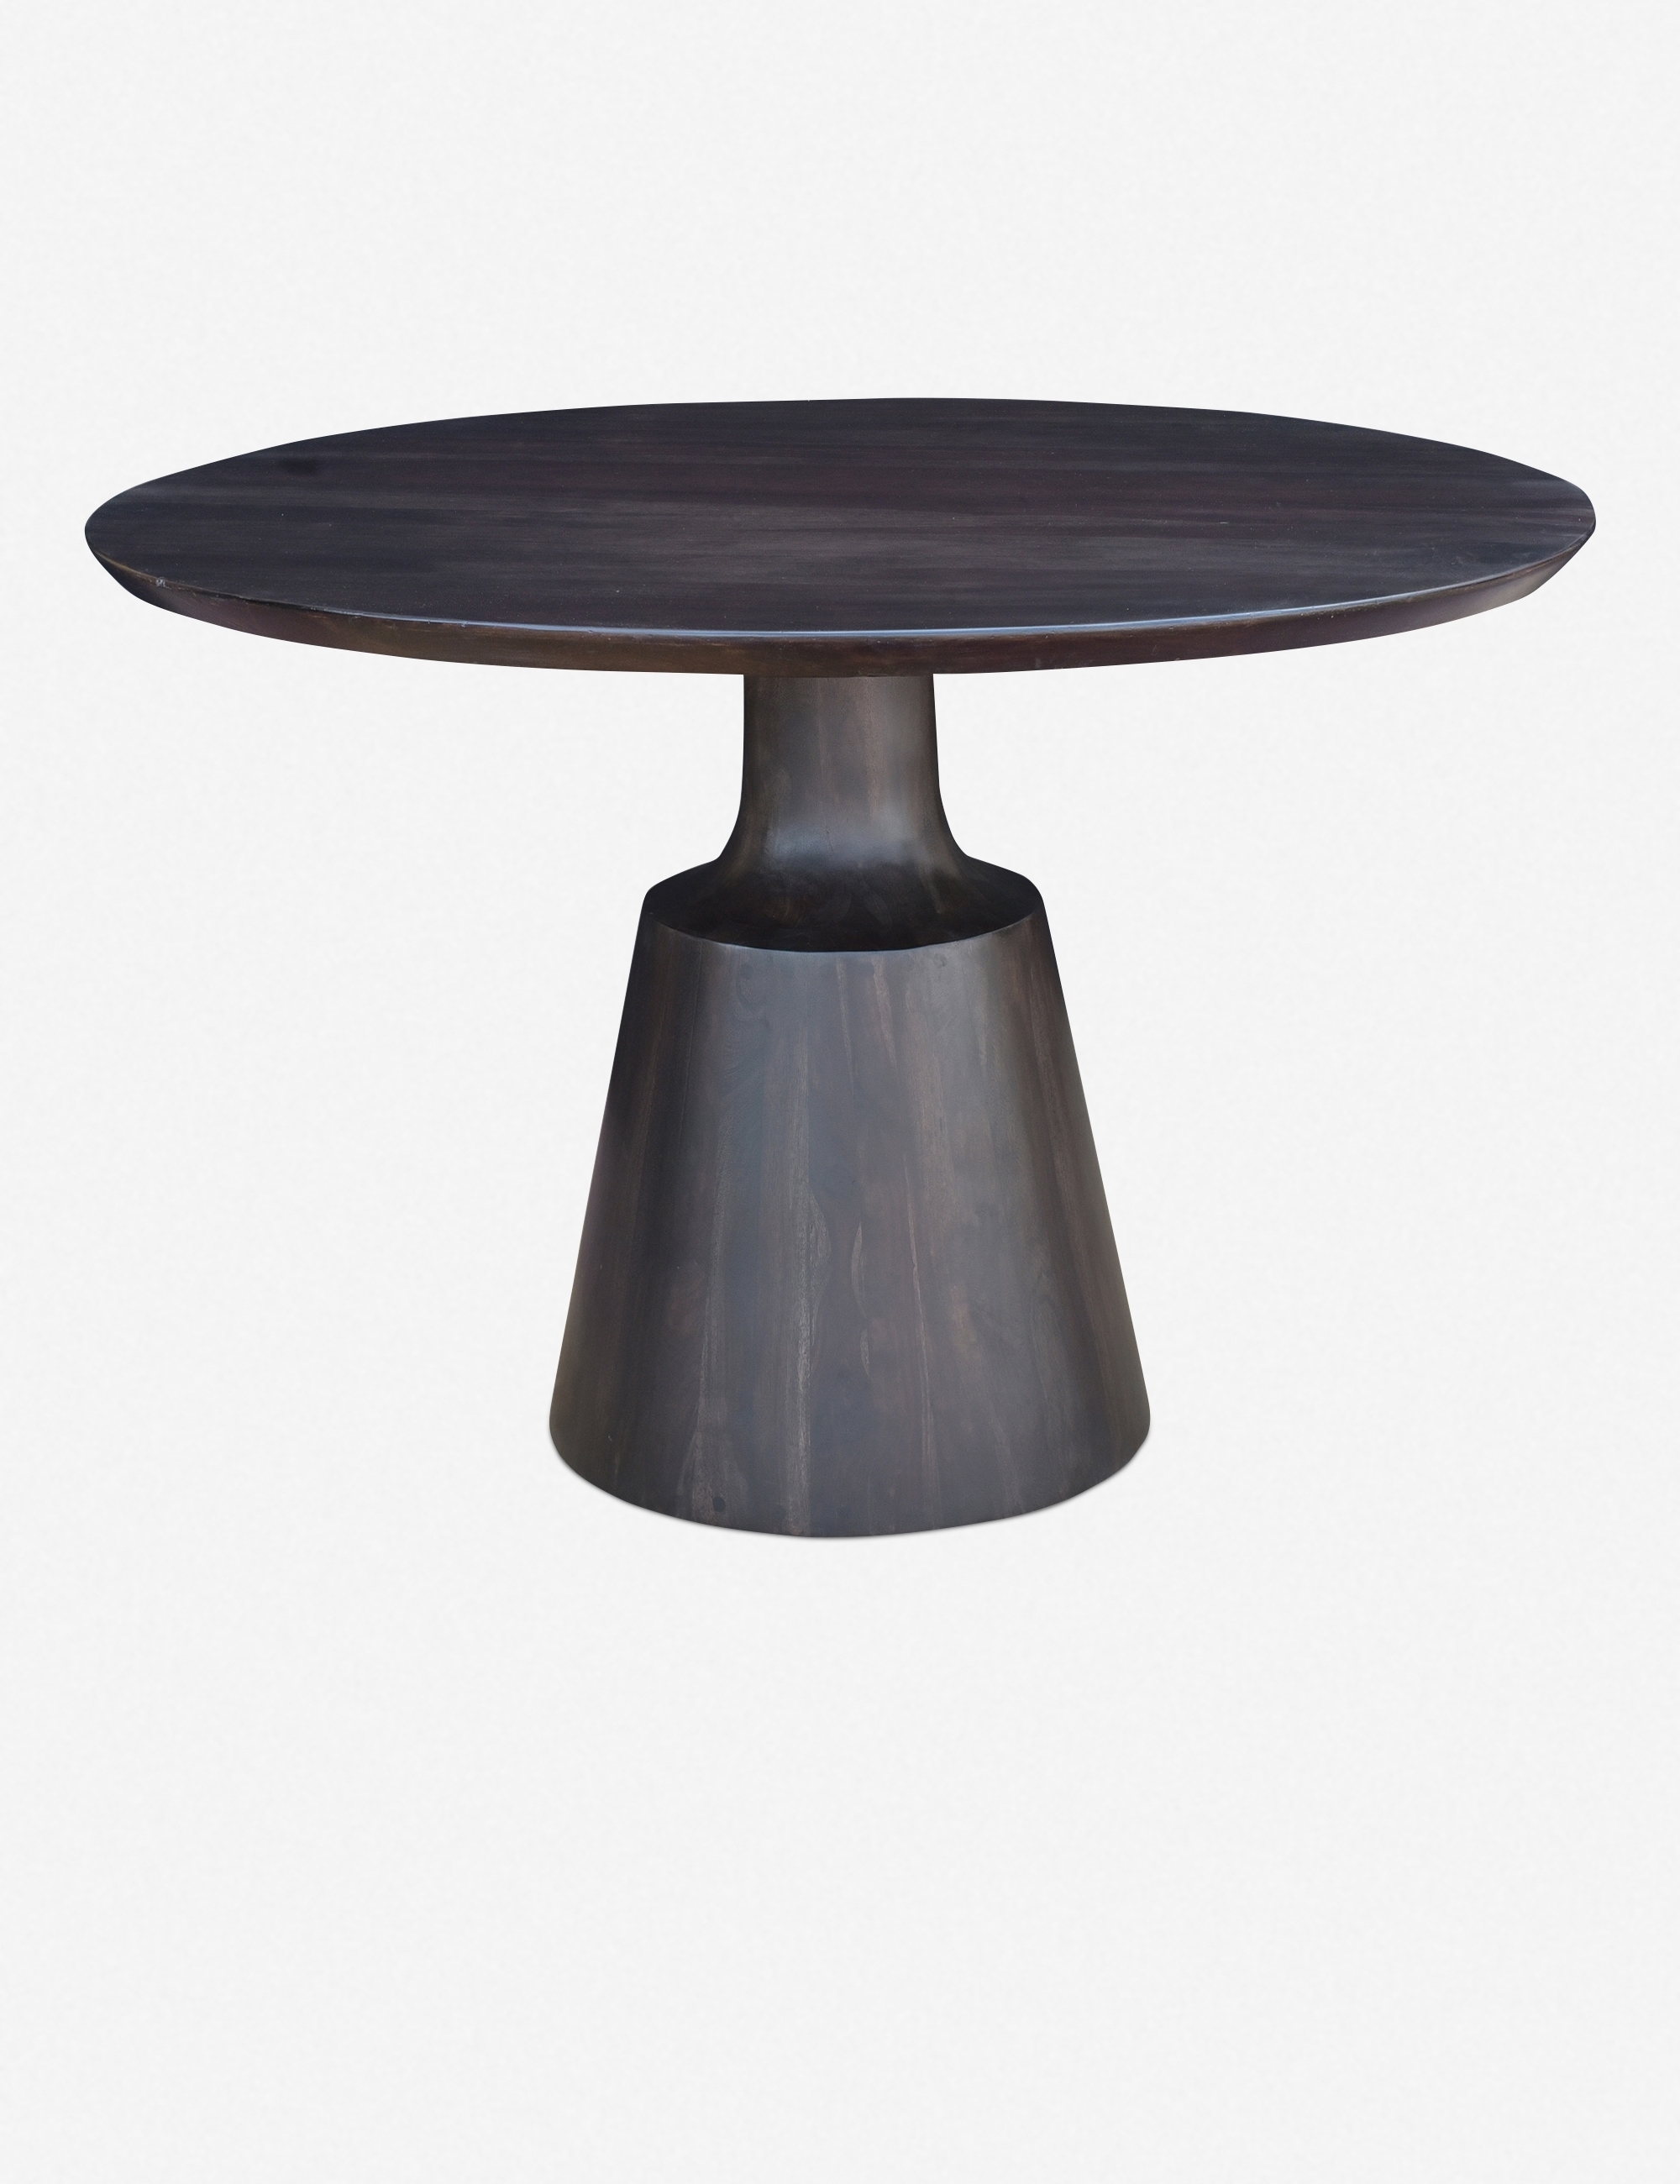 Belize Round Dining Table - Image 5